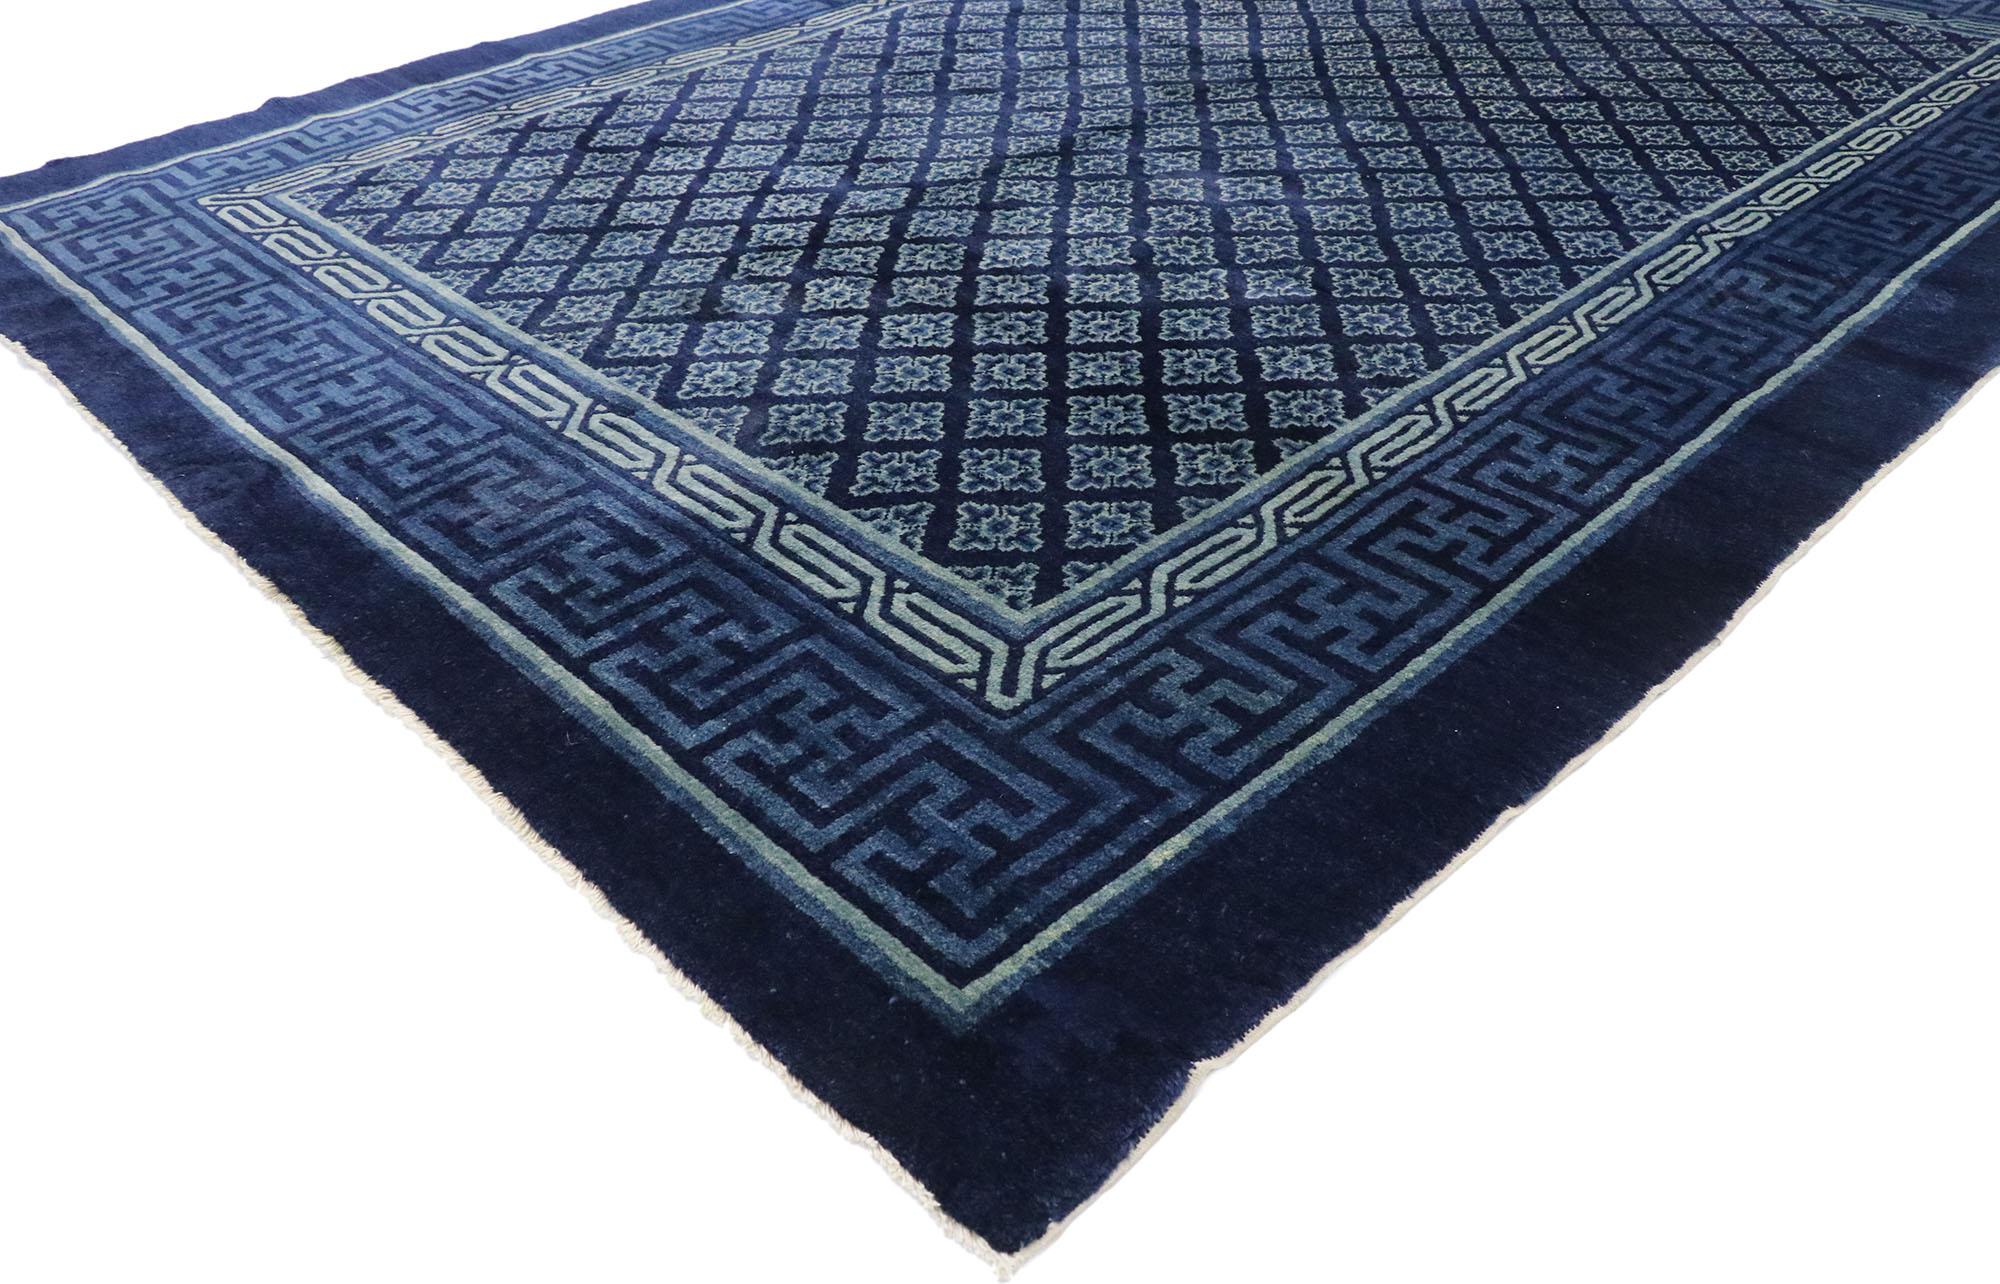 53395 antique Chinese Baotou rug with Qing Dynasty style. This hand-knotted wool antique Chinese Baotou rug features an all-over geometric pattern overlaid upon a sumptuous deep blue backdrop. Located in the Inner Mongolia region of northern China,